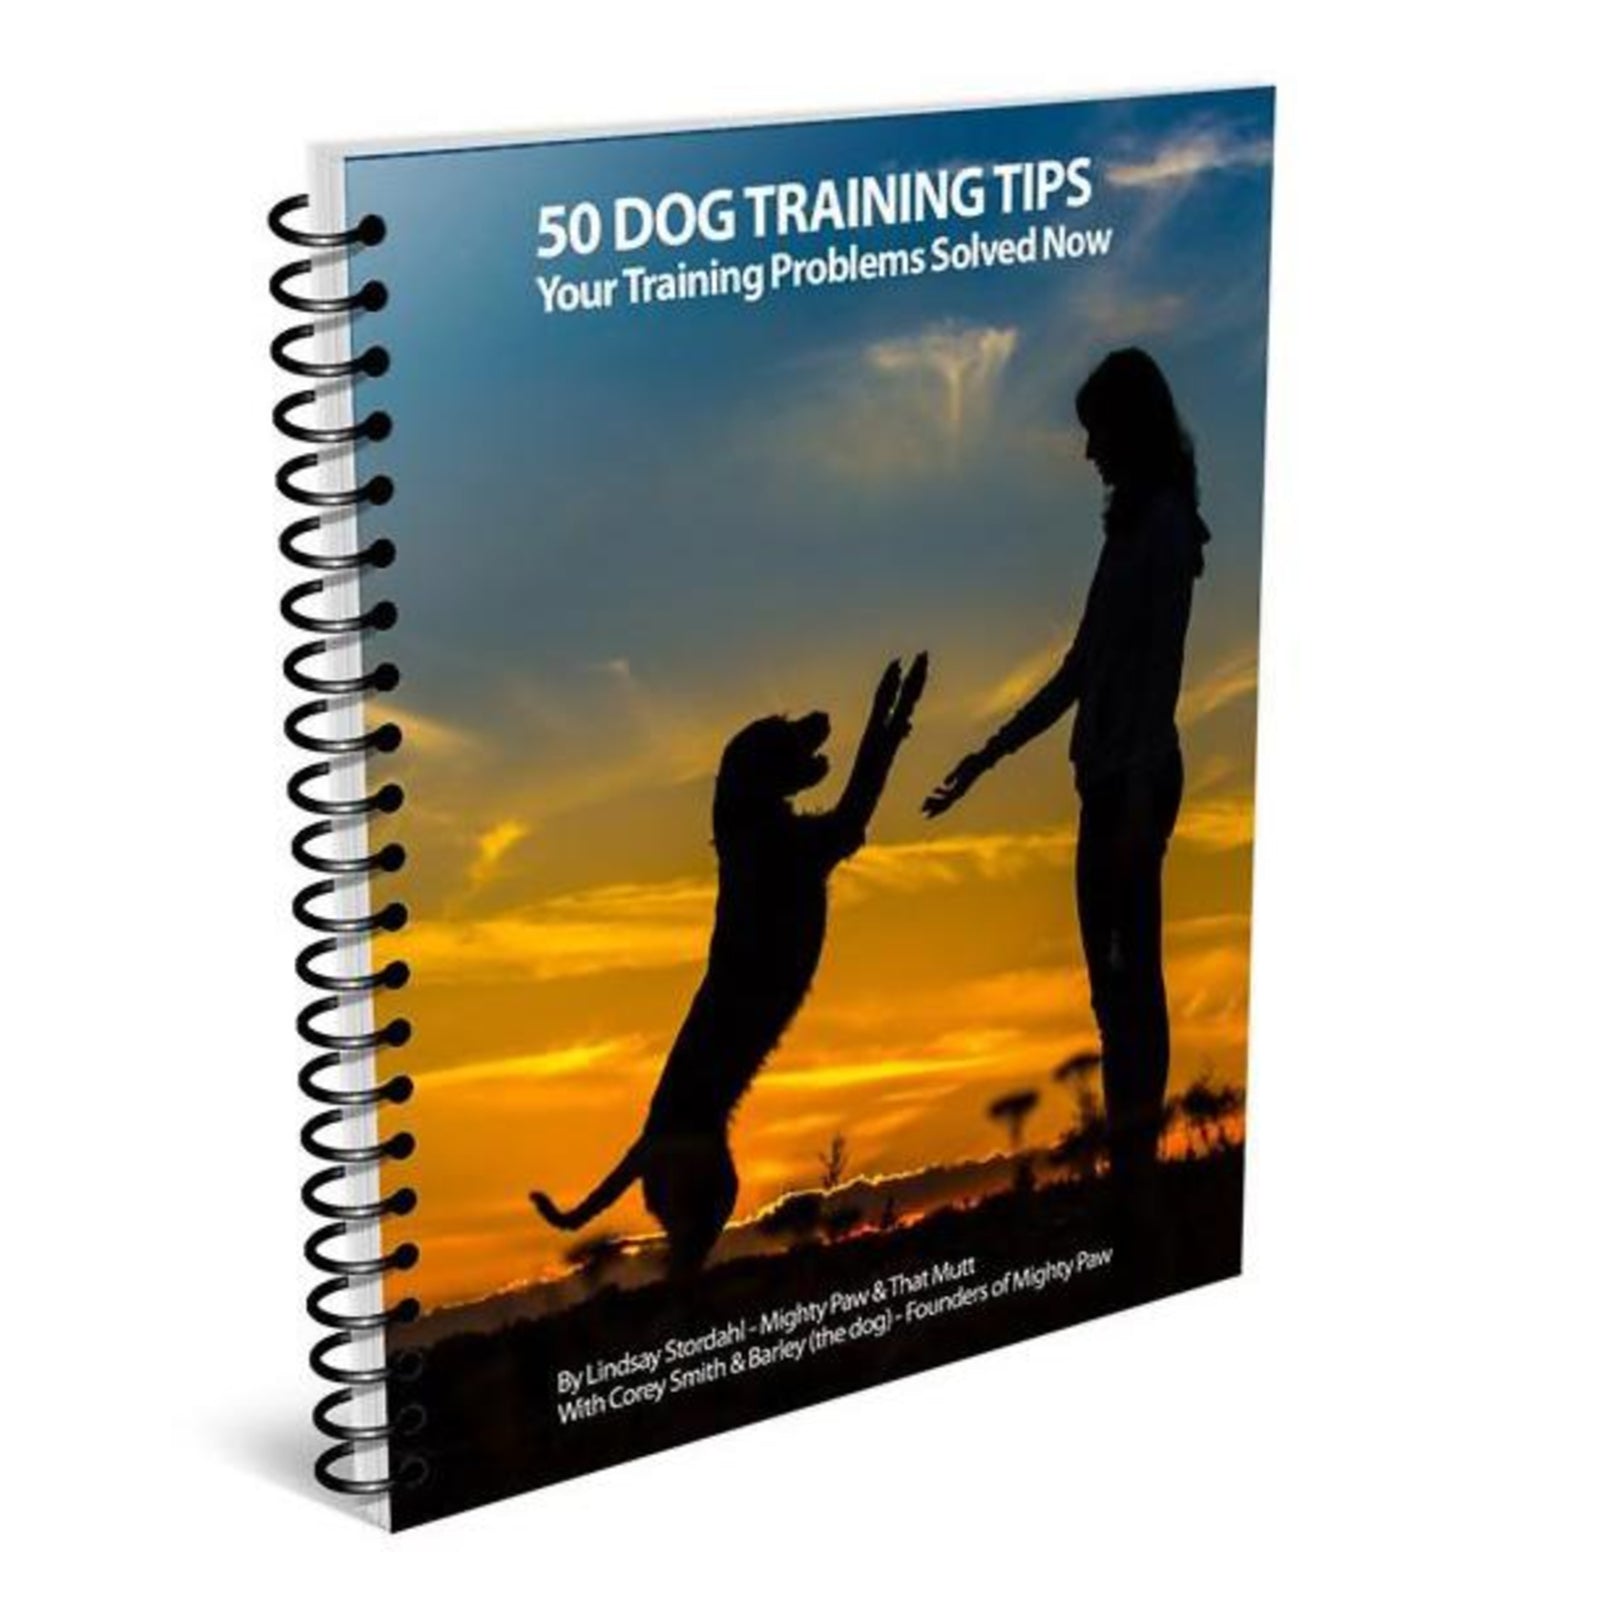 [Ebook] 50 Dog Training Tips - Your Training Problems Solved Now